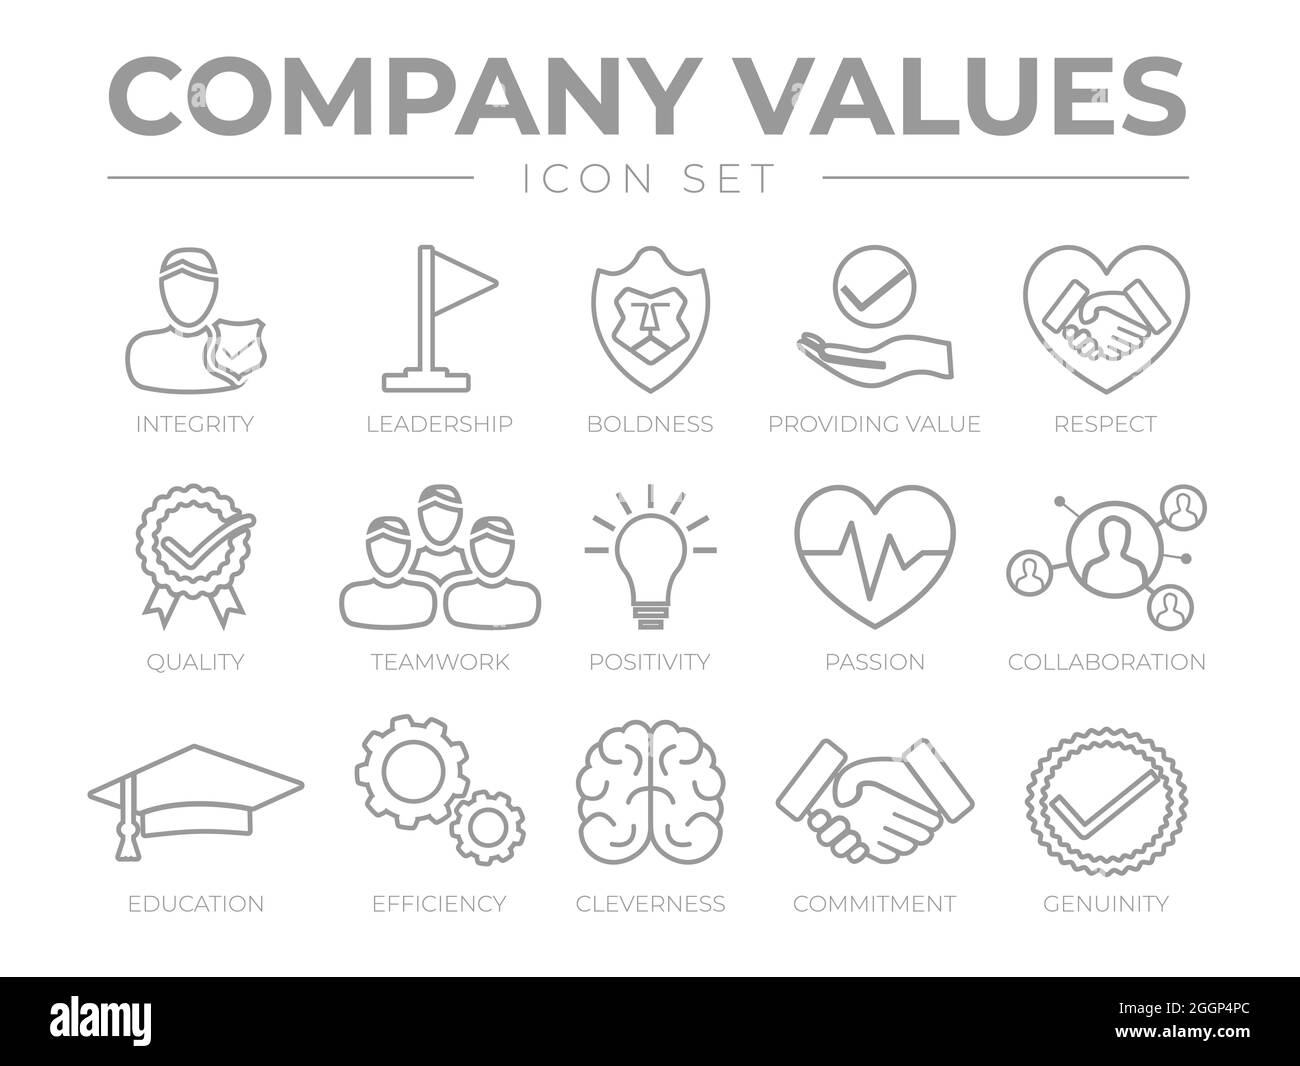 Business Company Values Outline Icon Set. Integrity, Leadership, Boldness, Value, Respect, Quality, Teamwork, Positivity, Passion, Collaboration, Educ Stock Vector